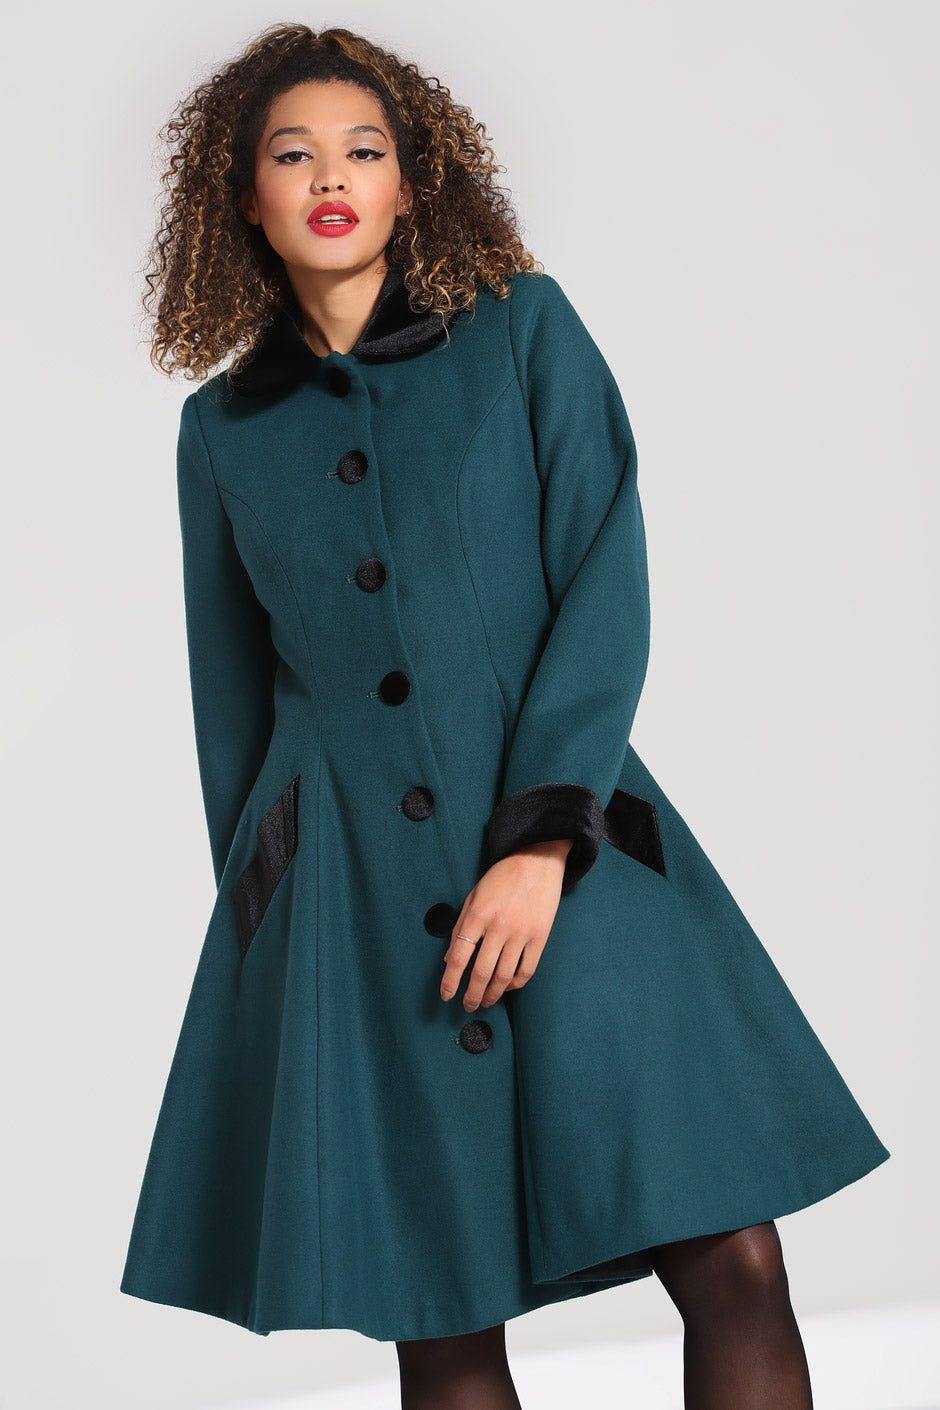 Curly haired vintage woman wearing a dark green coat with black buttons, collar and cuffs